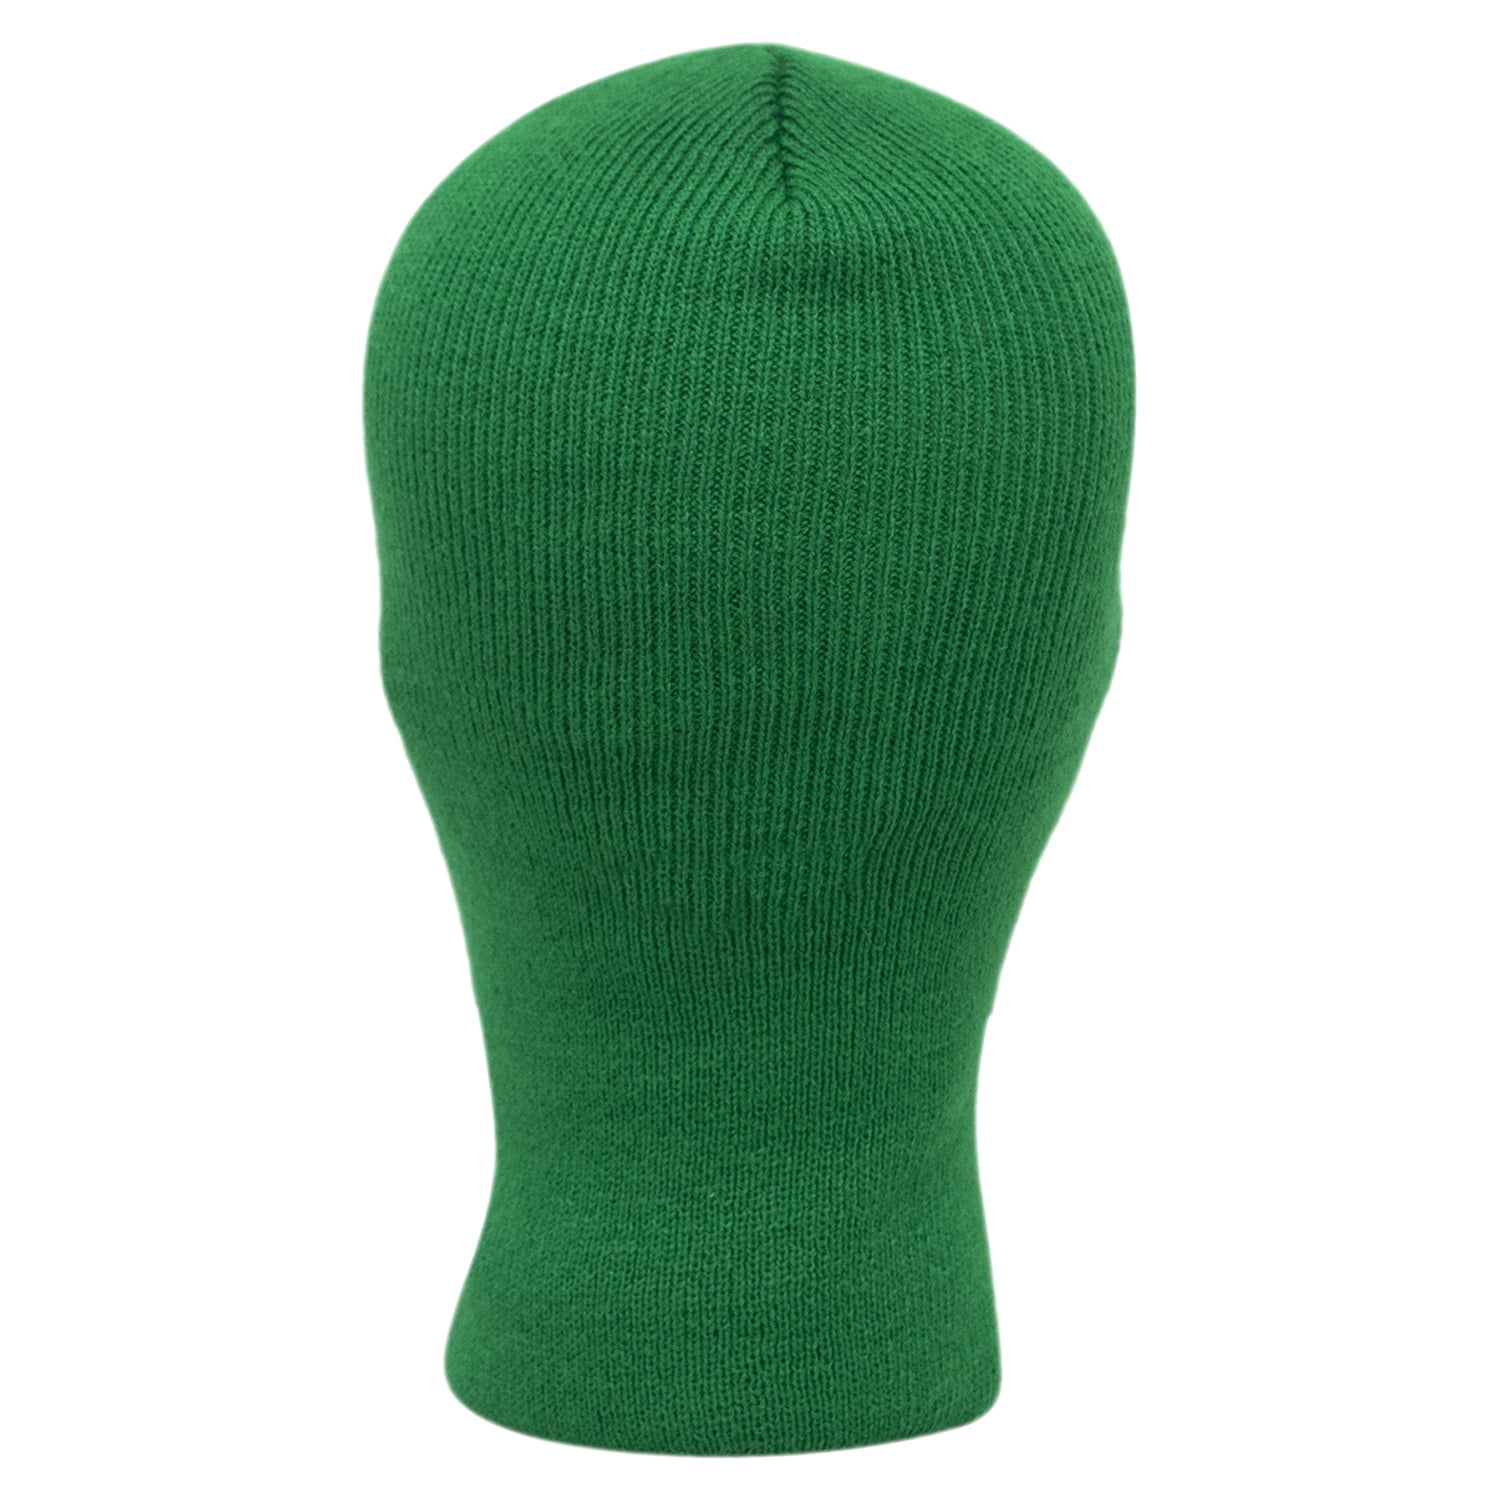 Kelly Green One Hole Thinsulate Ski Mask - Single Piece - Made in USA